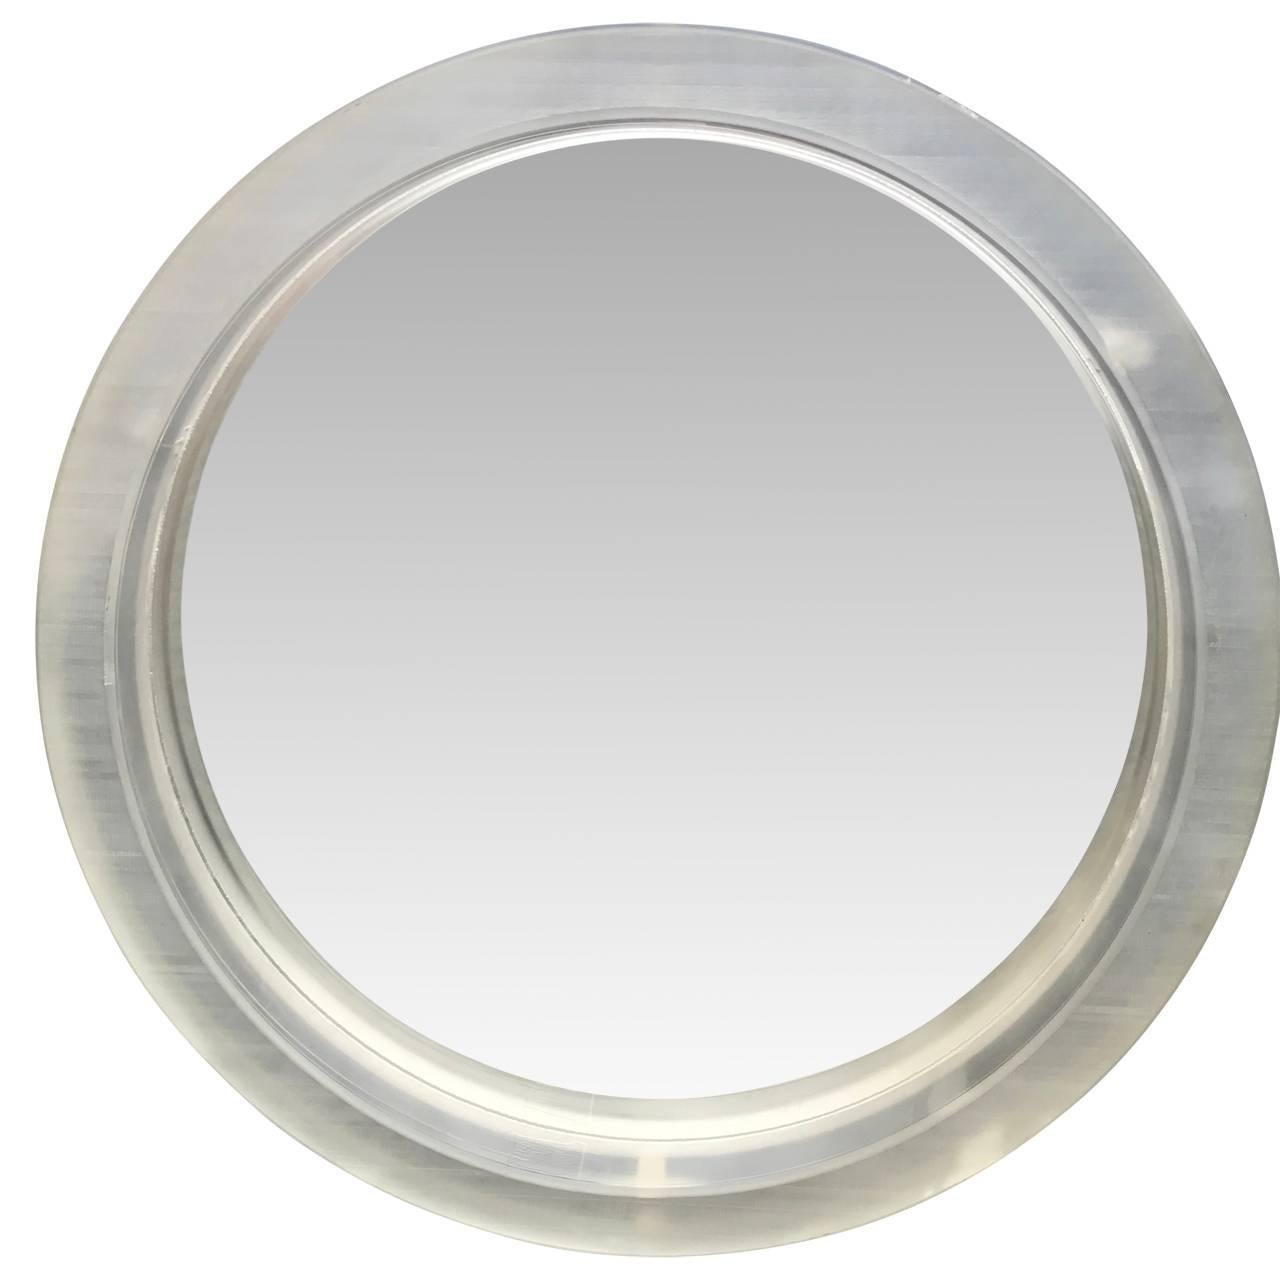 3 inch thick circular rough-cut mirrors.
A single thick framed acrylic or Lucite mirror. The surface on the mirror is rough and individual, due their handcrafted cut. Please request additional images of the individual wear to the frames. The mirror